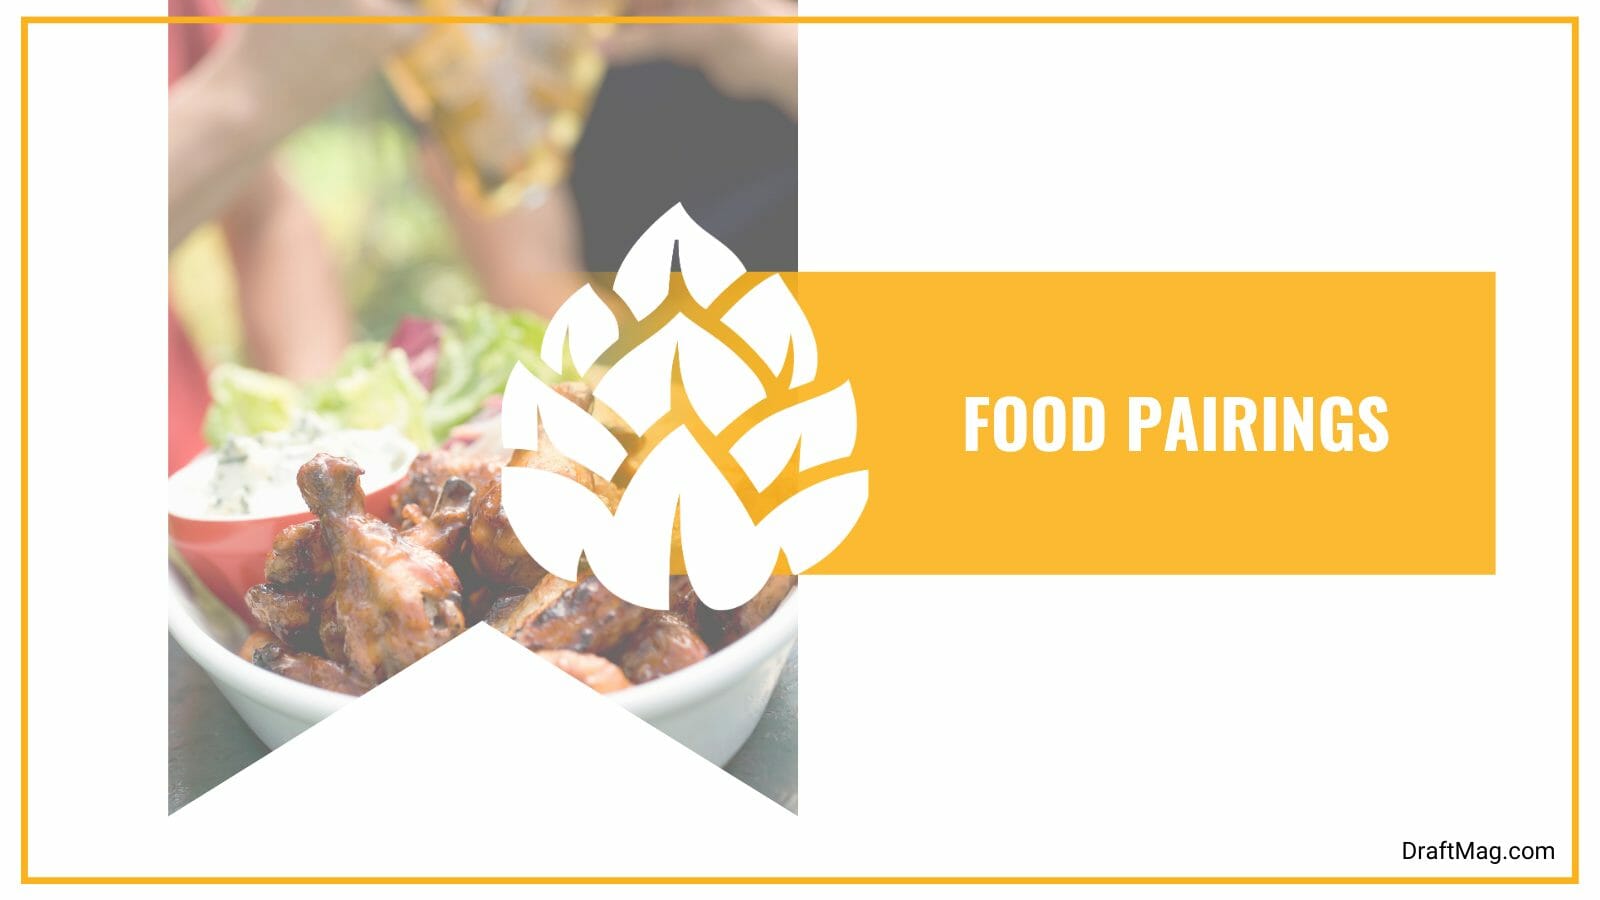 Rich food and beer pairing